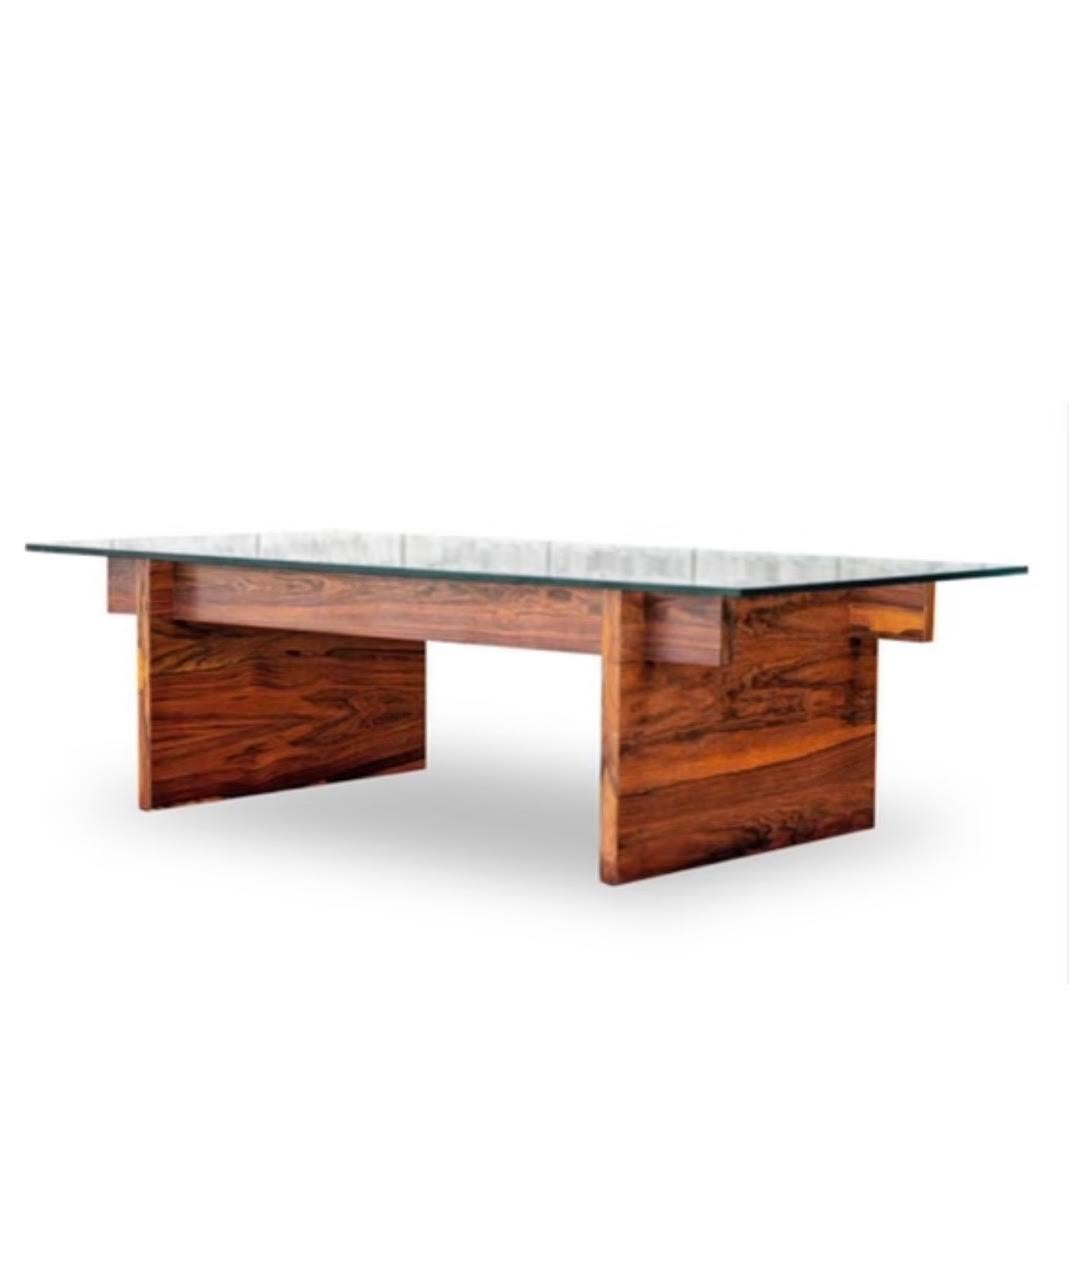 Danish Modern  Rosewood coffee table / cocktail table with glass top. Designed and made by Svend Langkilde. Made in Denmark in the 1960s 

This is a Gorgous and Sophisticated large glass top coffee table

 Glass is 3/4 of an inch thick and very